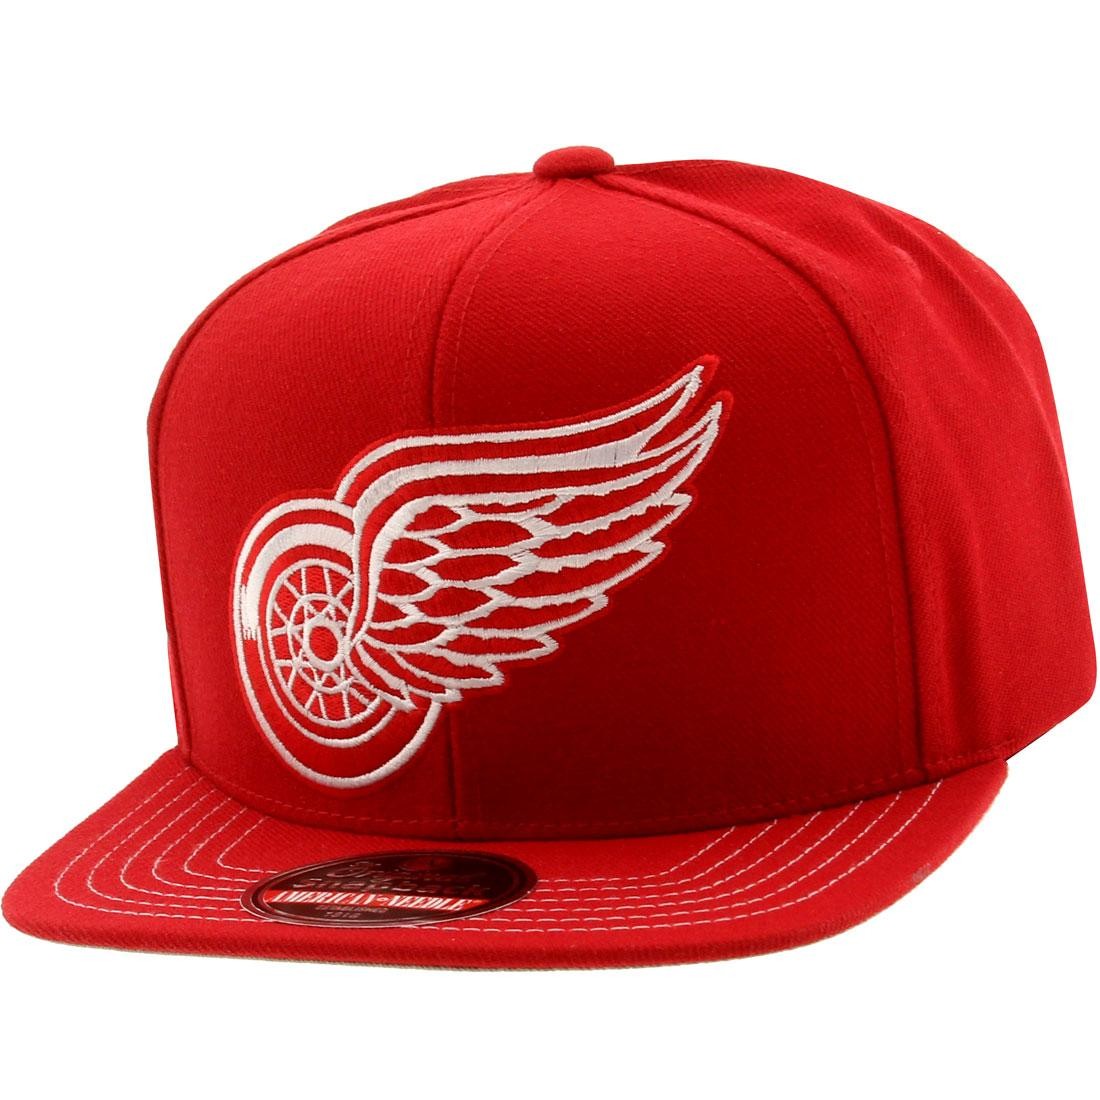 American Needle Detroit Red Wings Mammoth Snapback cap COT01 (red / red)